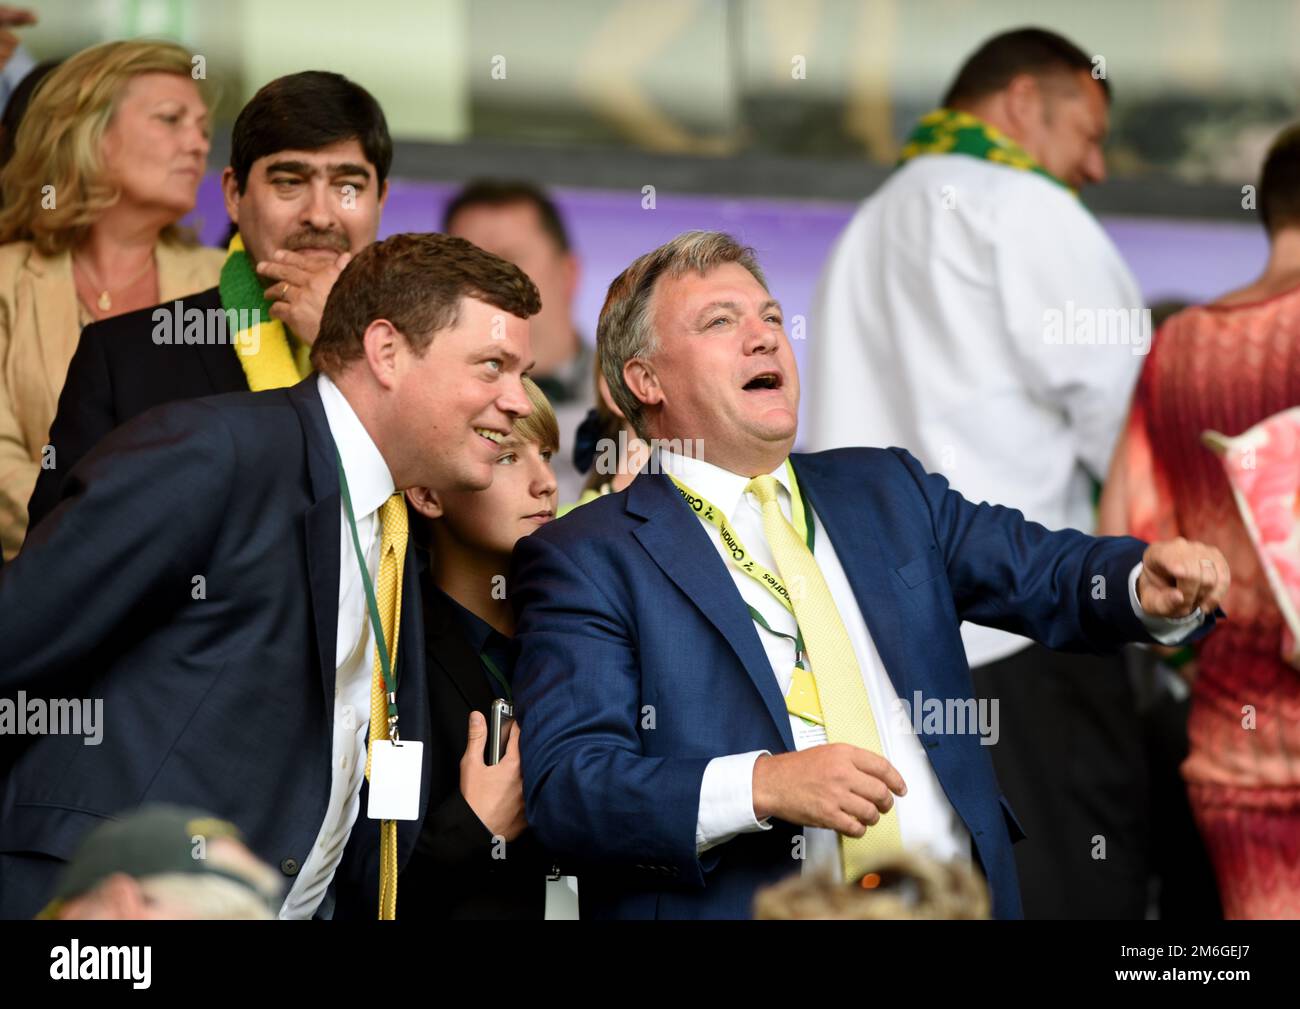 Ed Balls who will be appearing in Strictly come dancing- Norwich City v Sheffield Wednesday, Sky Bet Championship, Carrow Road, Norwich - 13th August 2016. - Norwich City v Sheffield Wednesday, Sky Bet Championship, Carrow Road, Norwich - 13th August 2016. Stock Photo